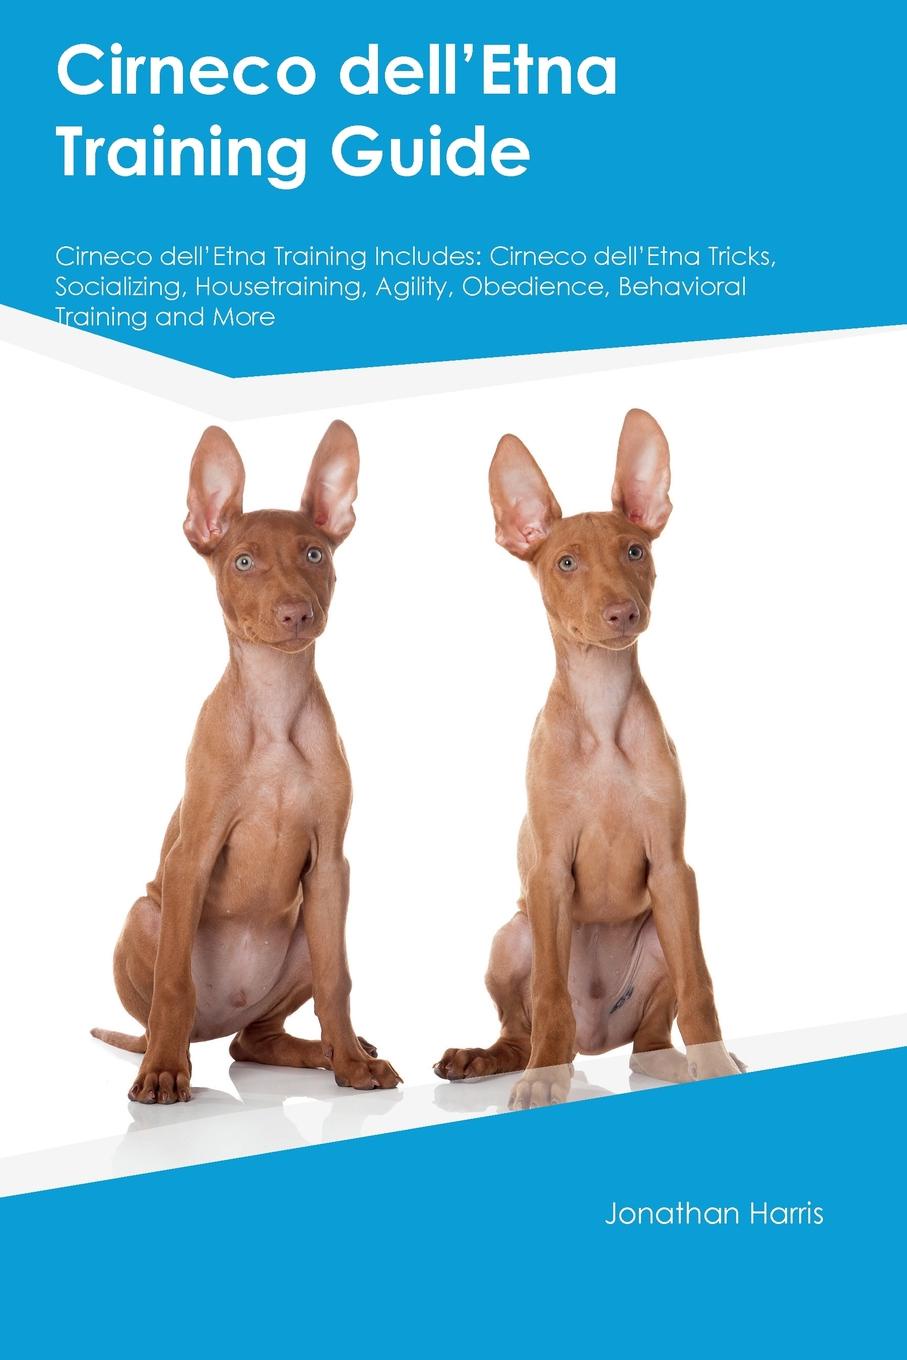 Cirneco dellAEEtna Training Guide Cirneco dellAEEtna Training Includes. Cirneco dellAEEtna Tricks, Socializing, Housetraining, Agility, Obedience, Behavioral Training and More